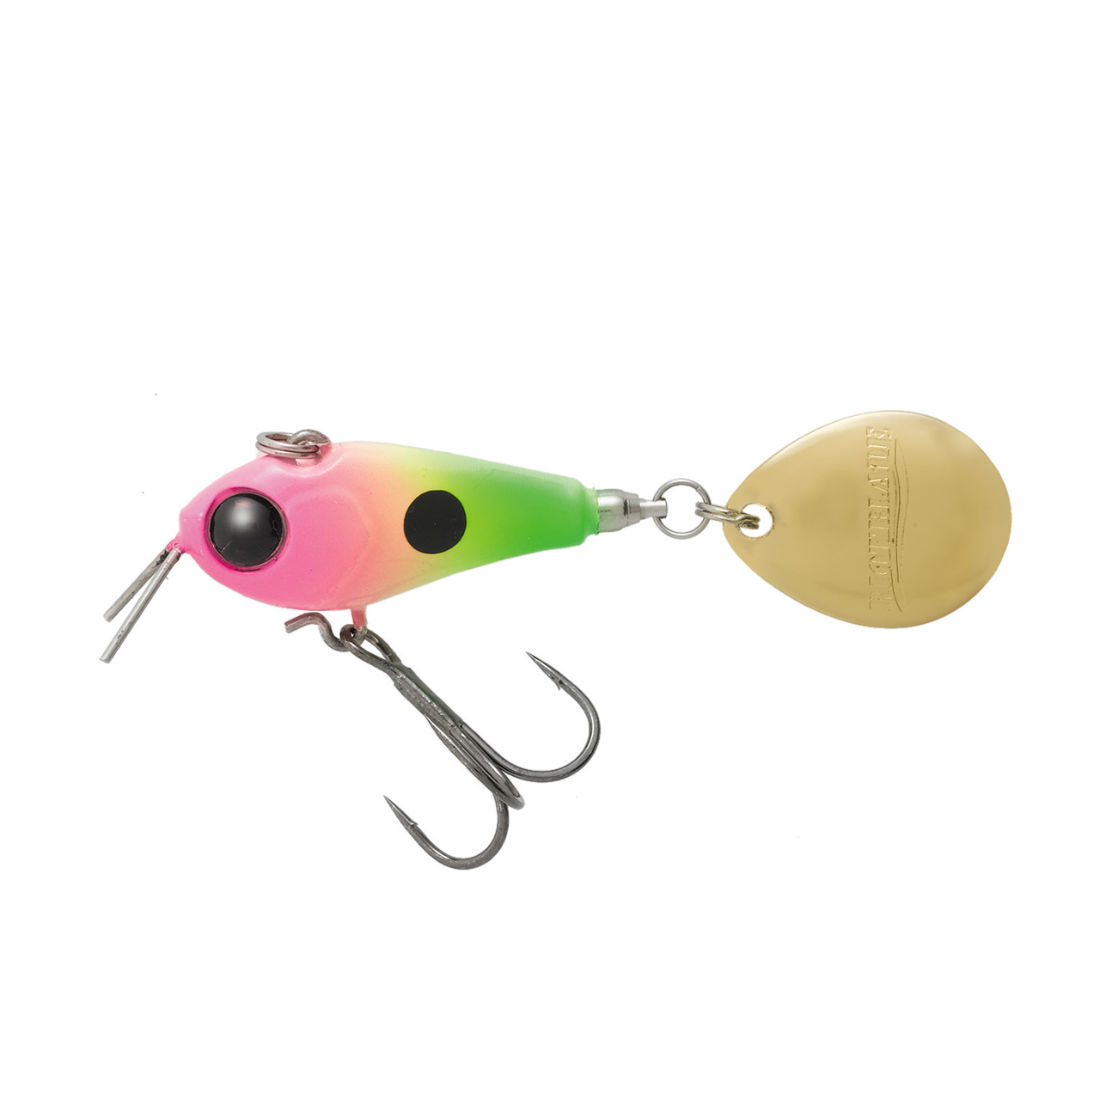 SPINNERTAIL TIEMCO RIOT BLADE S 25mm 9gr 13 Pinky Lime Chartreuse